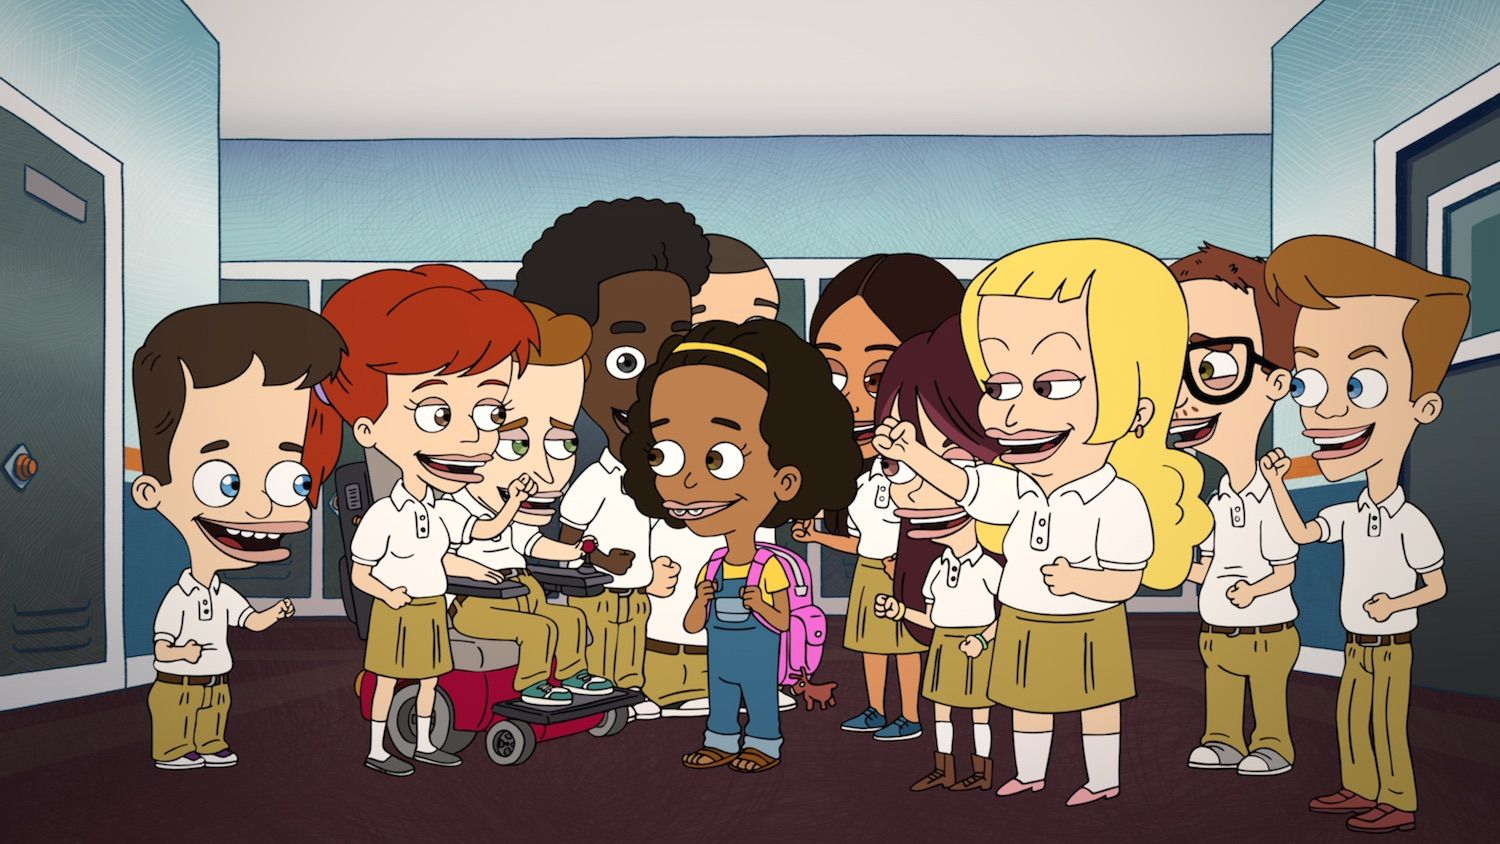 Demi Moore Cartoon Porn - Big Mouth' Addresses #MeToo Movement the Right Way in Season 3, Ep. 2